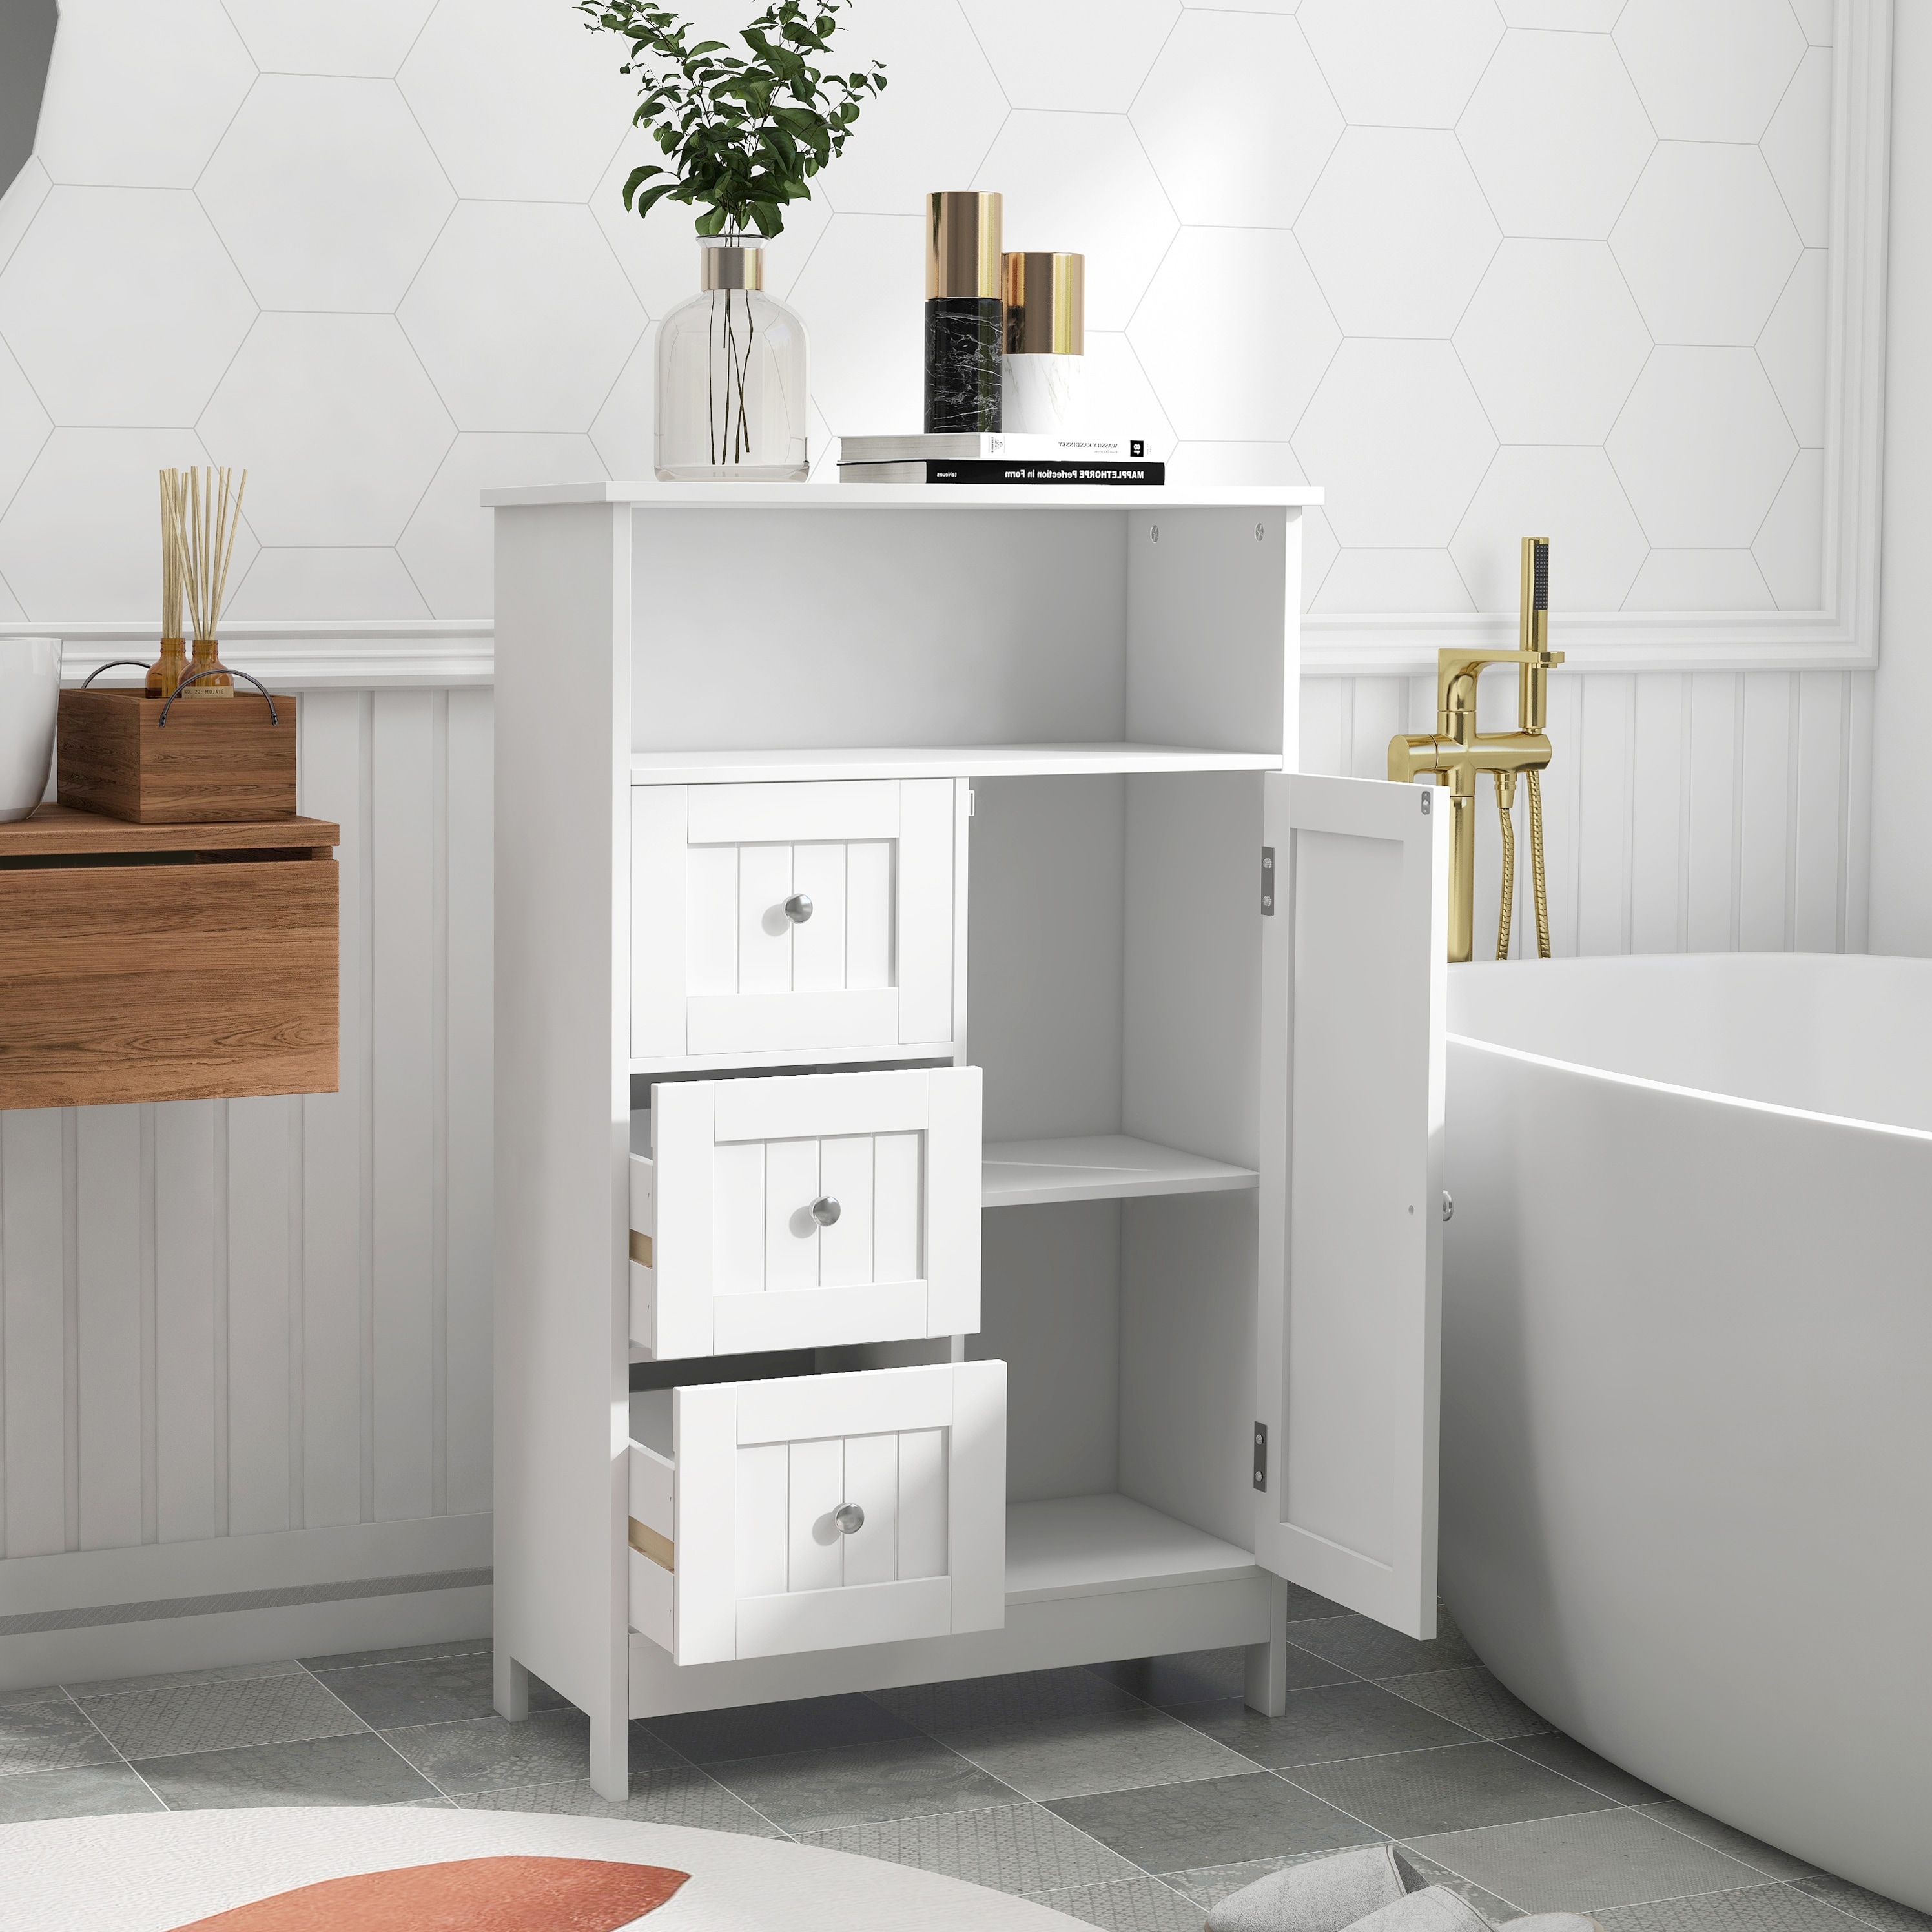 https://ak1.ostkcdn.com/images/products/is/images/direct/22c9f631c4878429a2376da01c193d210c4f8776/White-Bathroom-Standing-3-Drawers-Storage-Cabinet.jpg